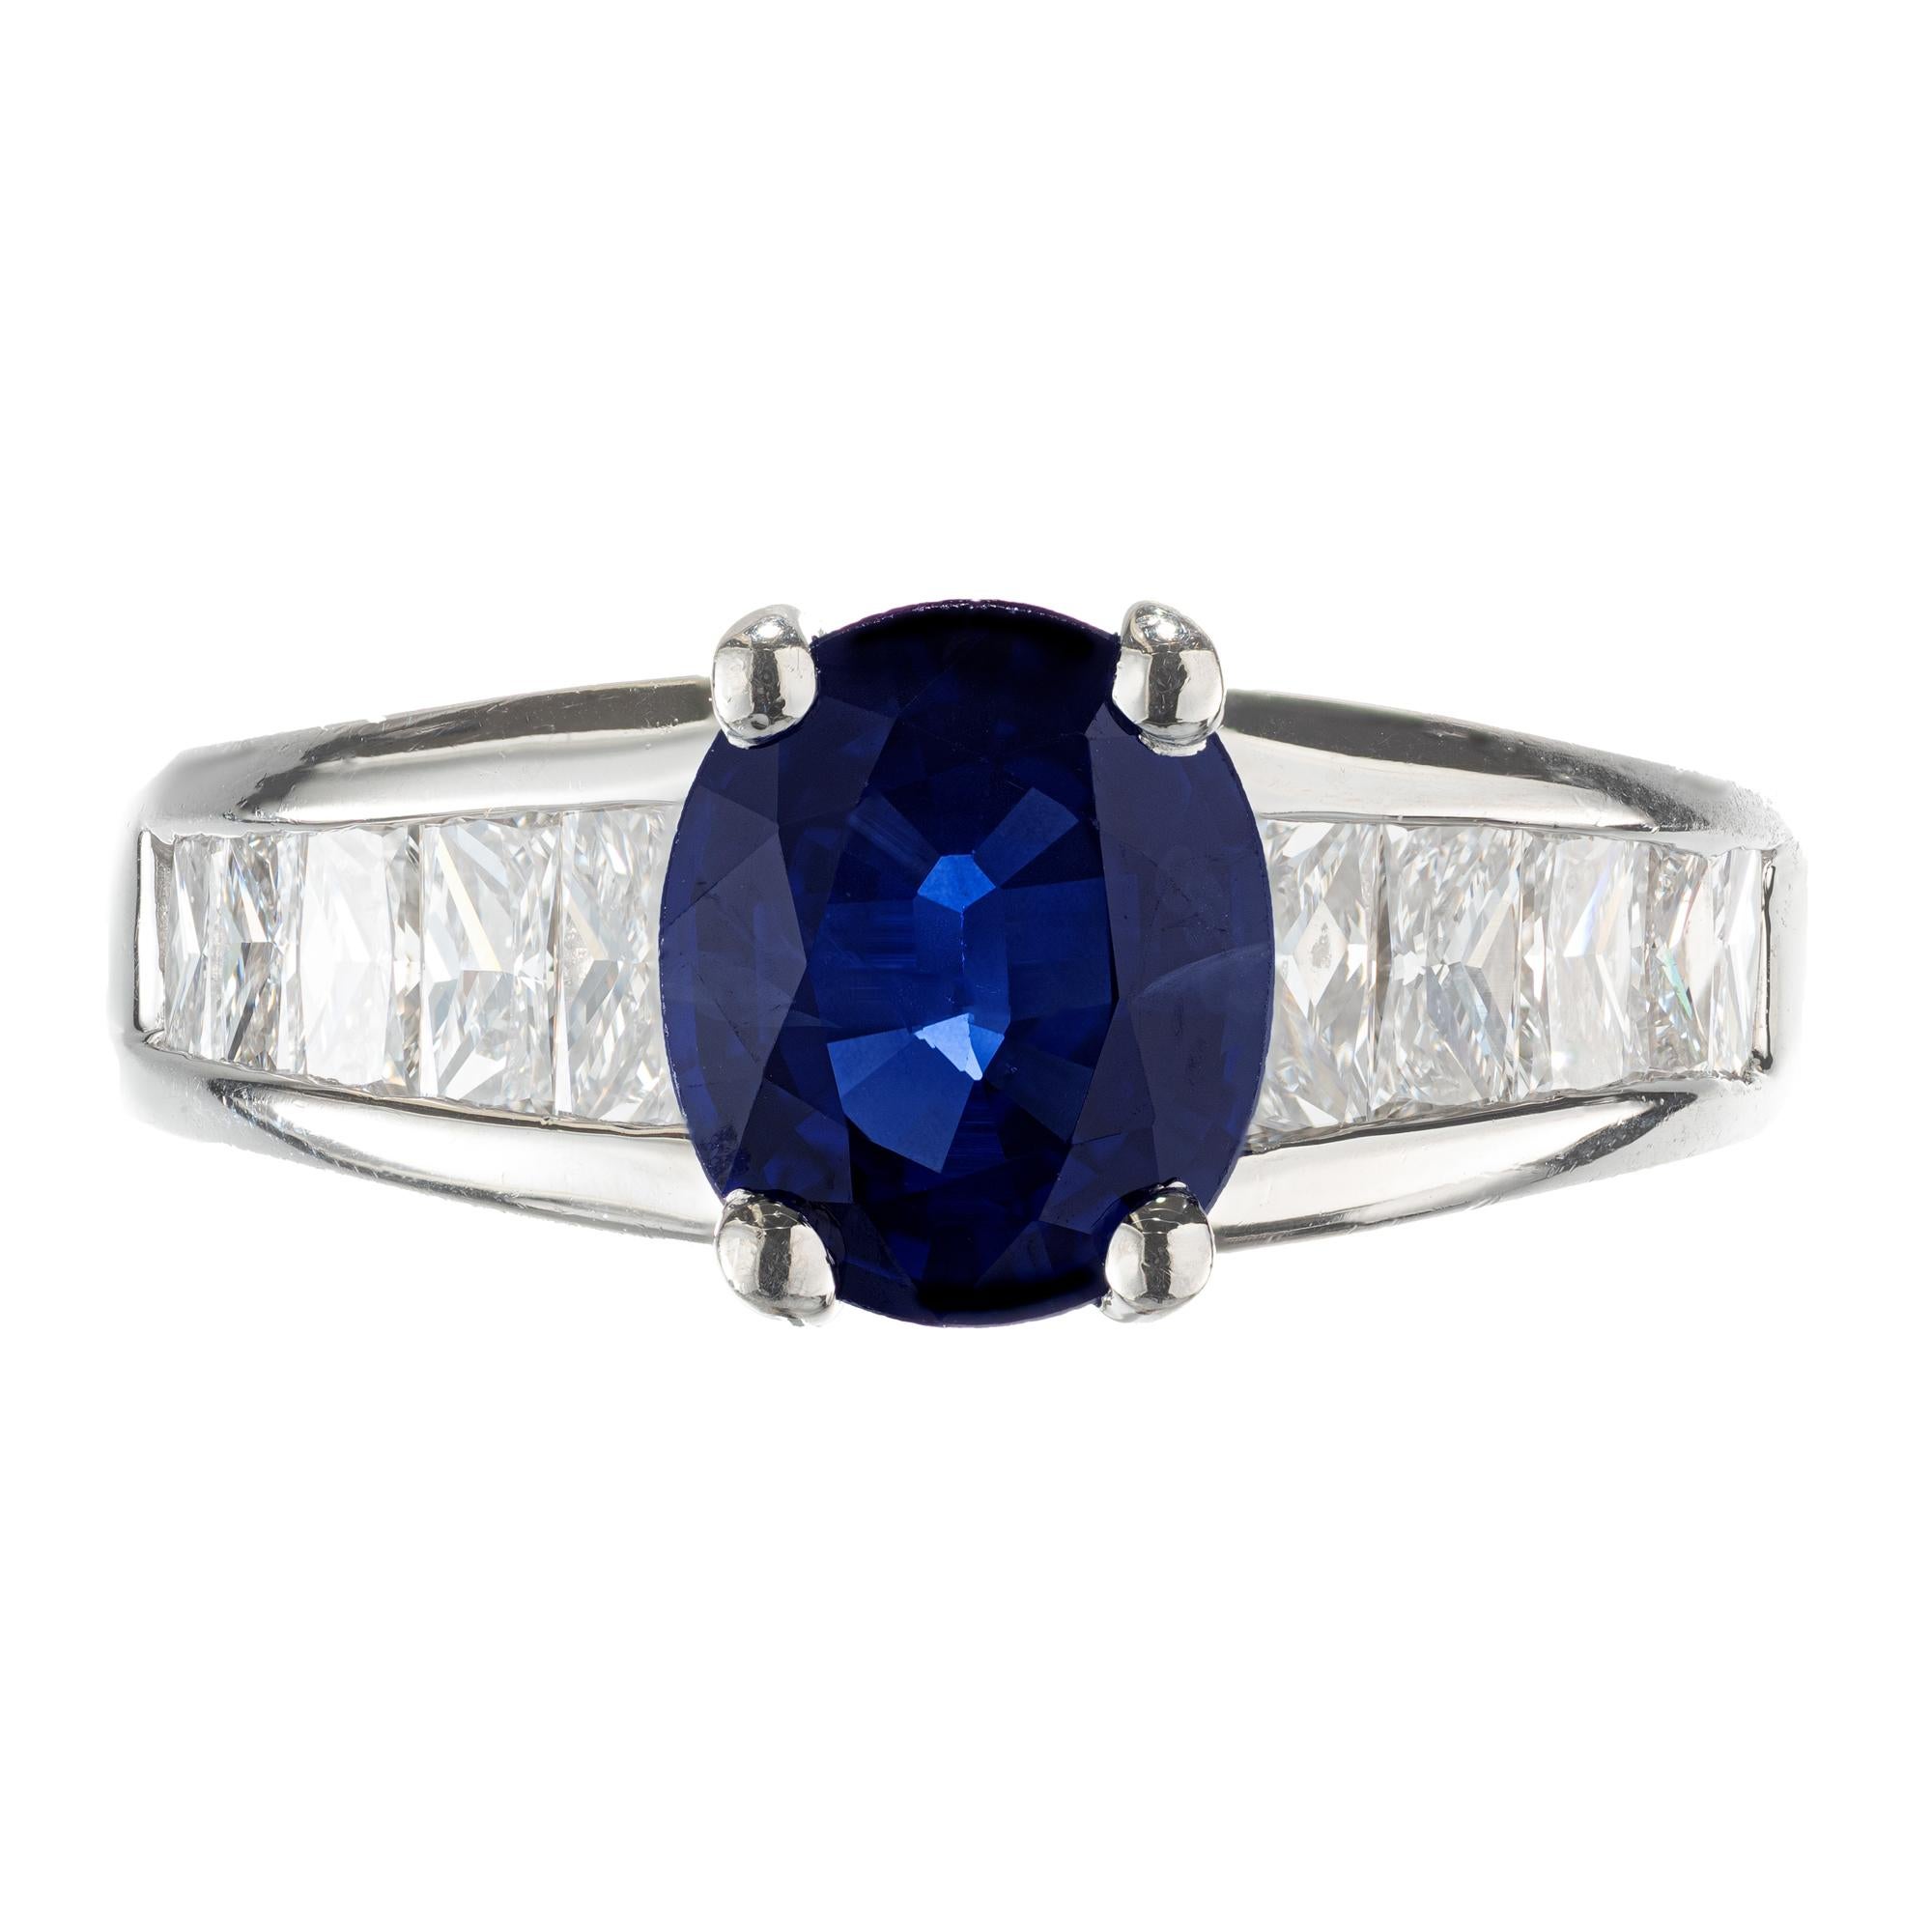 Designer Kobi, oval sapphire and diamond engagement ring. GIA certified Oval center sapphire with 10 radiant cut accent diamonds in a platinum setting. Simple heat only. 

1 GIA certificate 2601817, 9.6 x 8.5 x 4.2mm, approx. total weight 2.25cts,